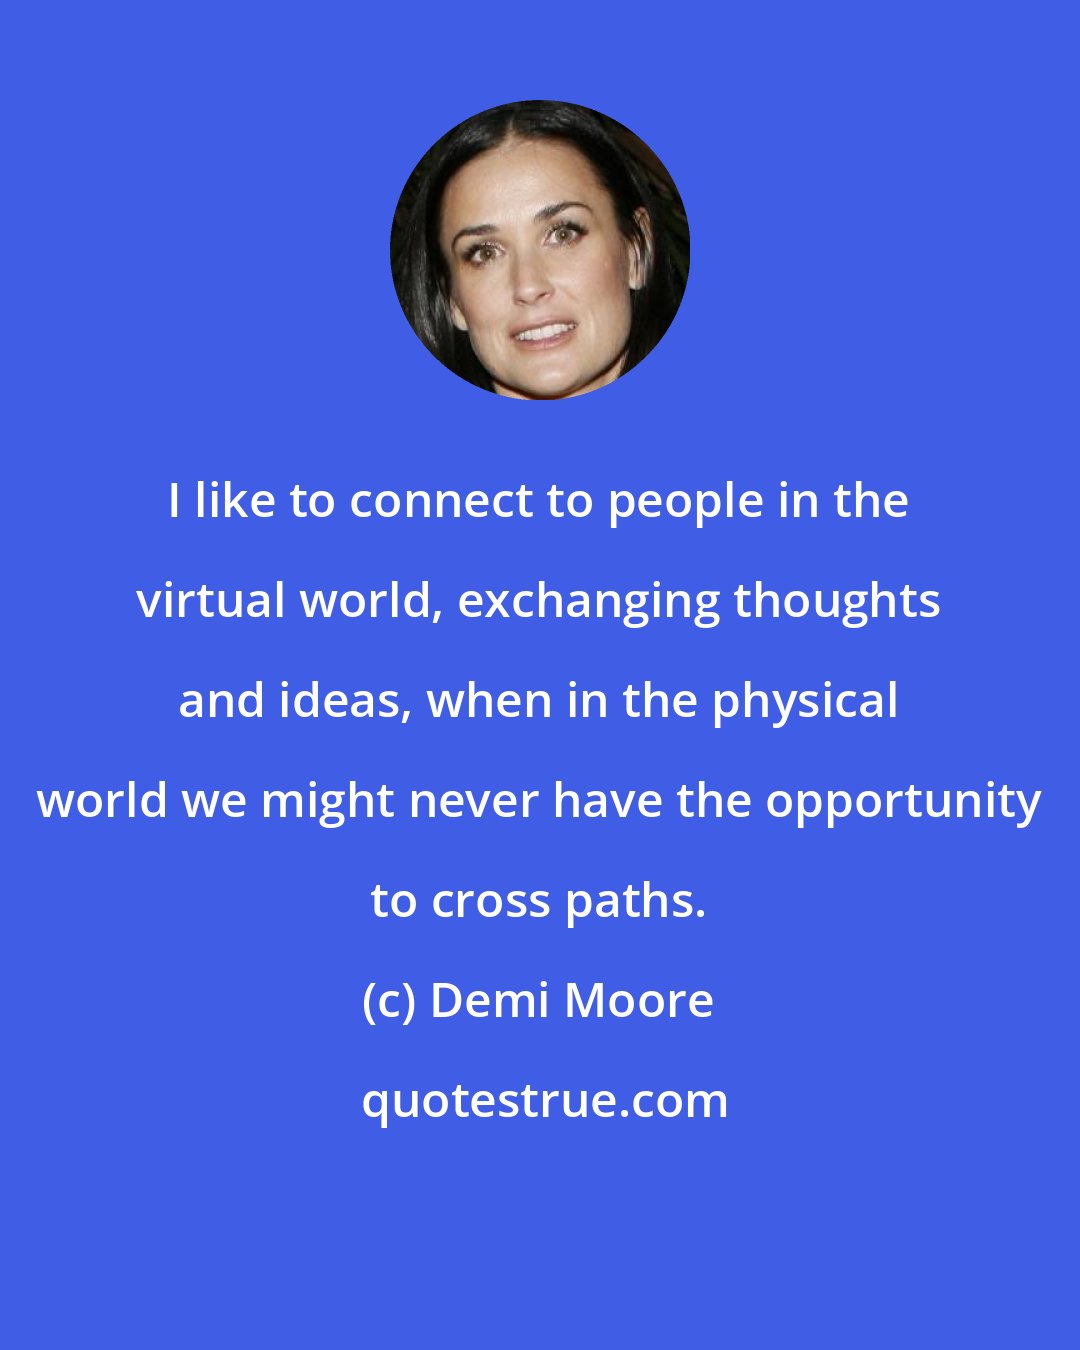 Demi Moore: I like to connect to people in the virtual world, exchanging thoughts and ideas, when in the physical world we might never have the opportunity to cross paths.